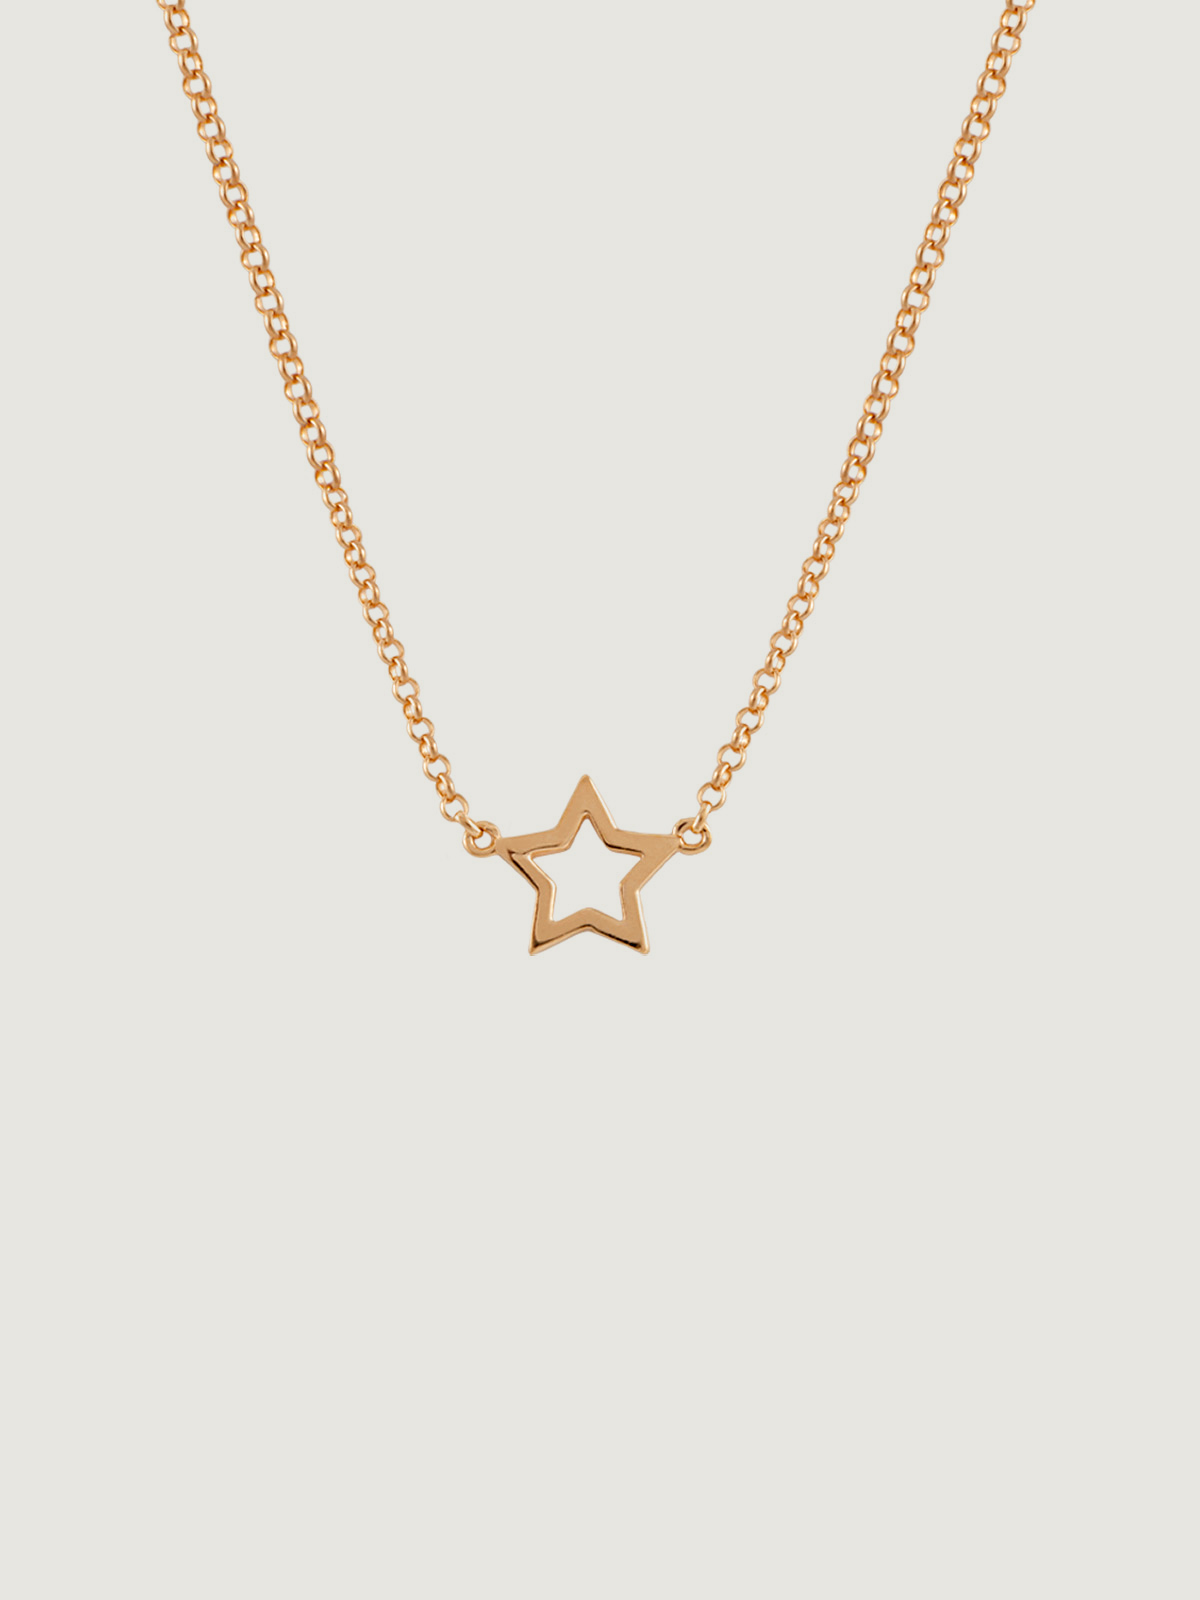 925 Silver pendant bathed in 18K rose gold with star